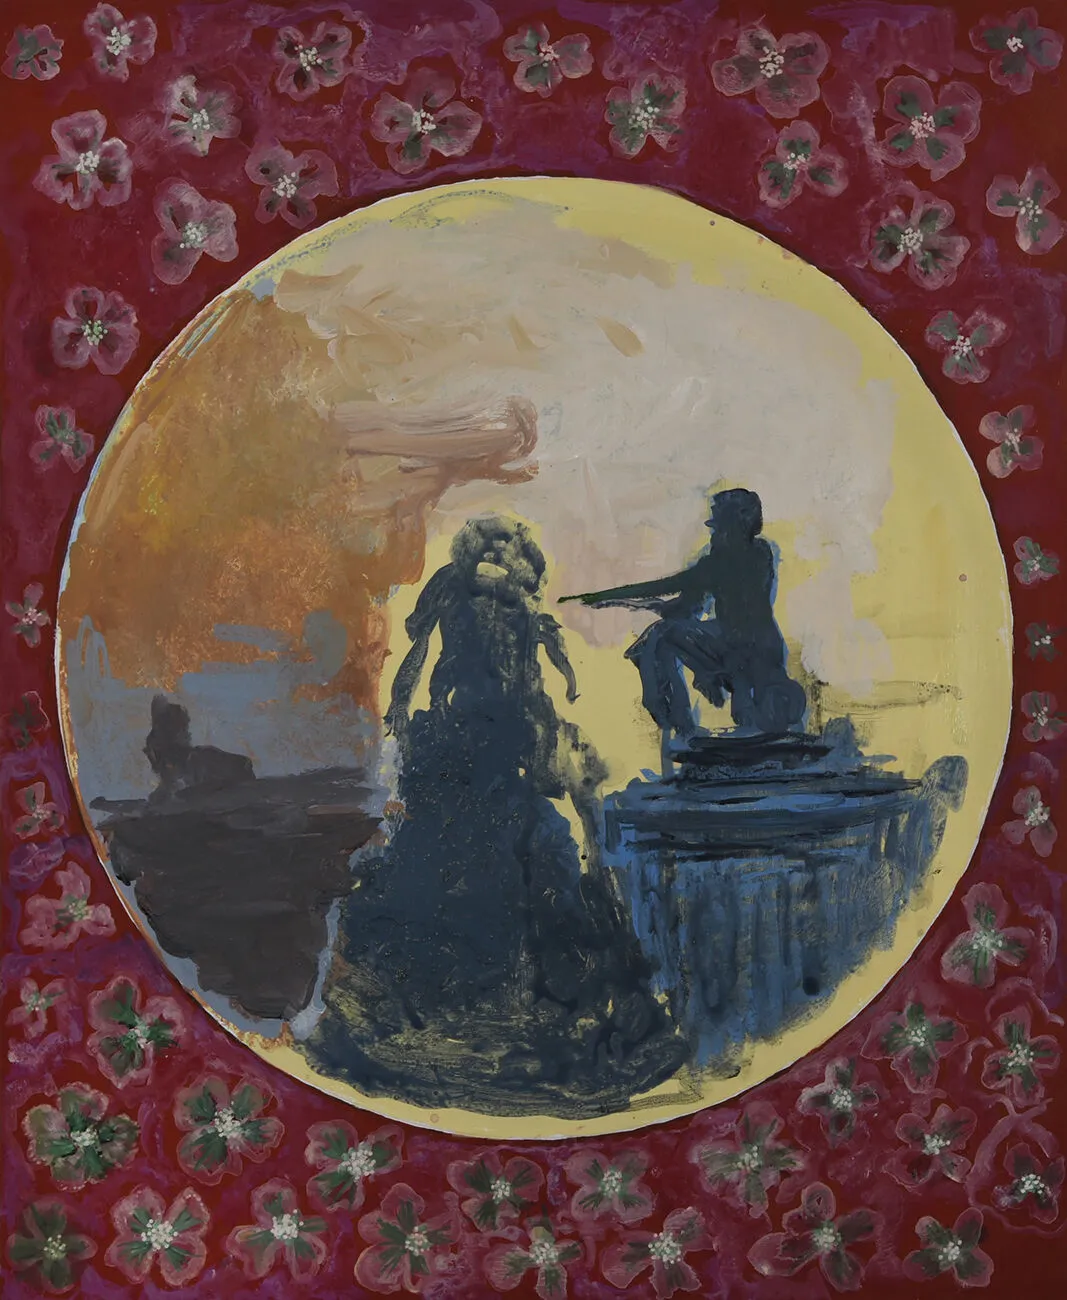 "Flowers can never be enough" - Rough painting of gun-holding figure on the lookout with a war-torn background